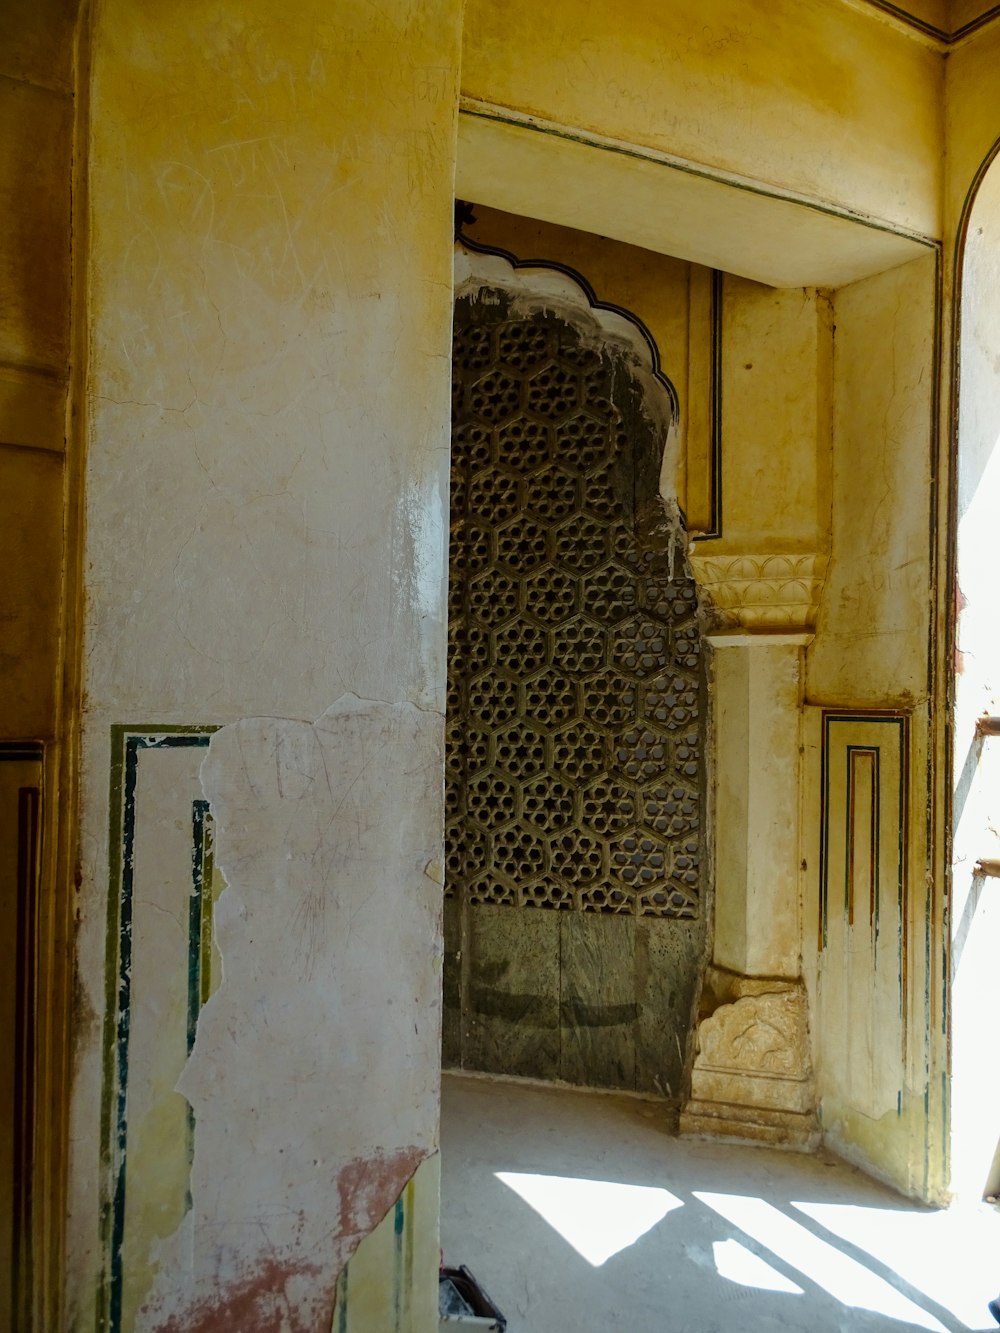 a doorway in a building with a clock on the wall